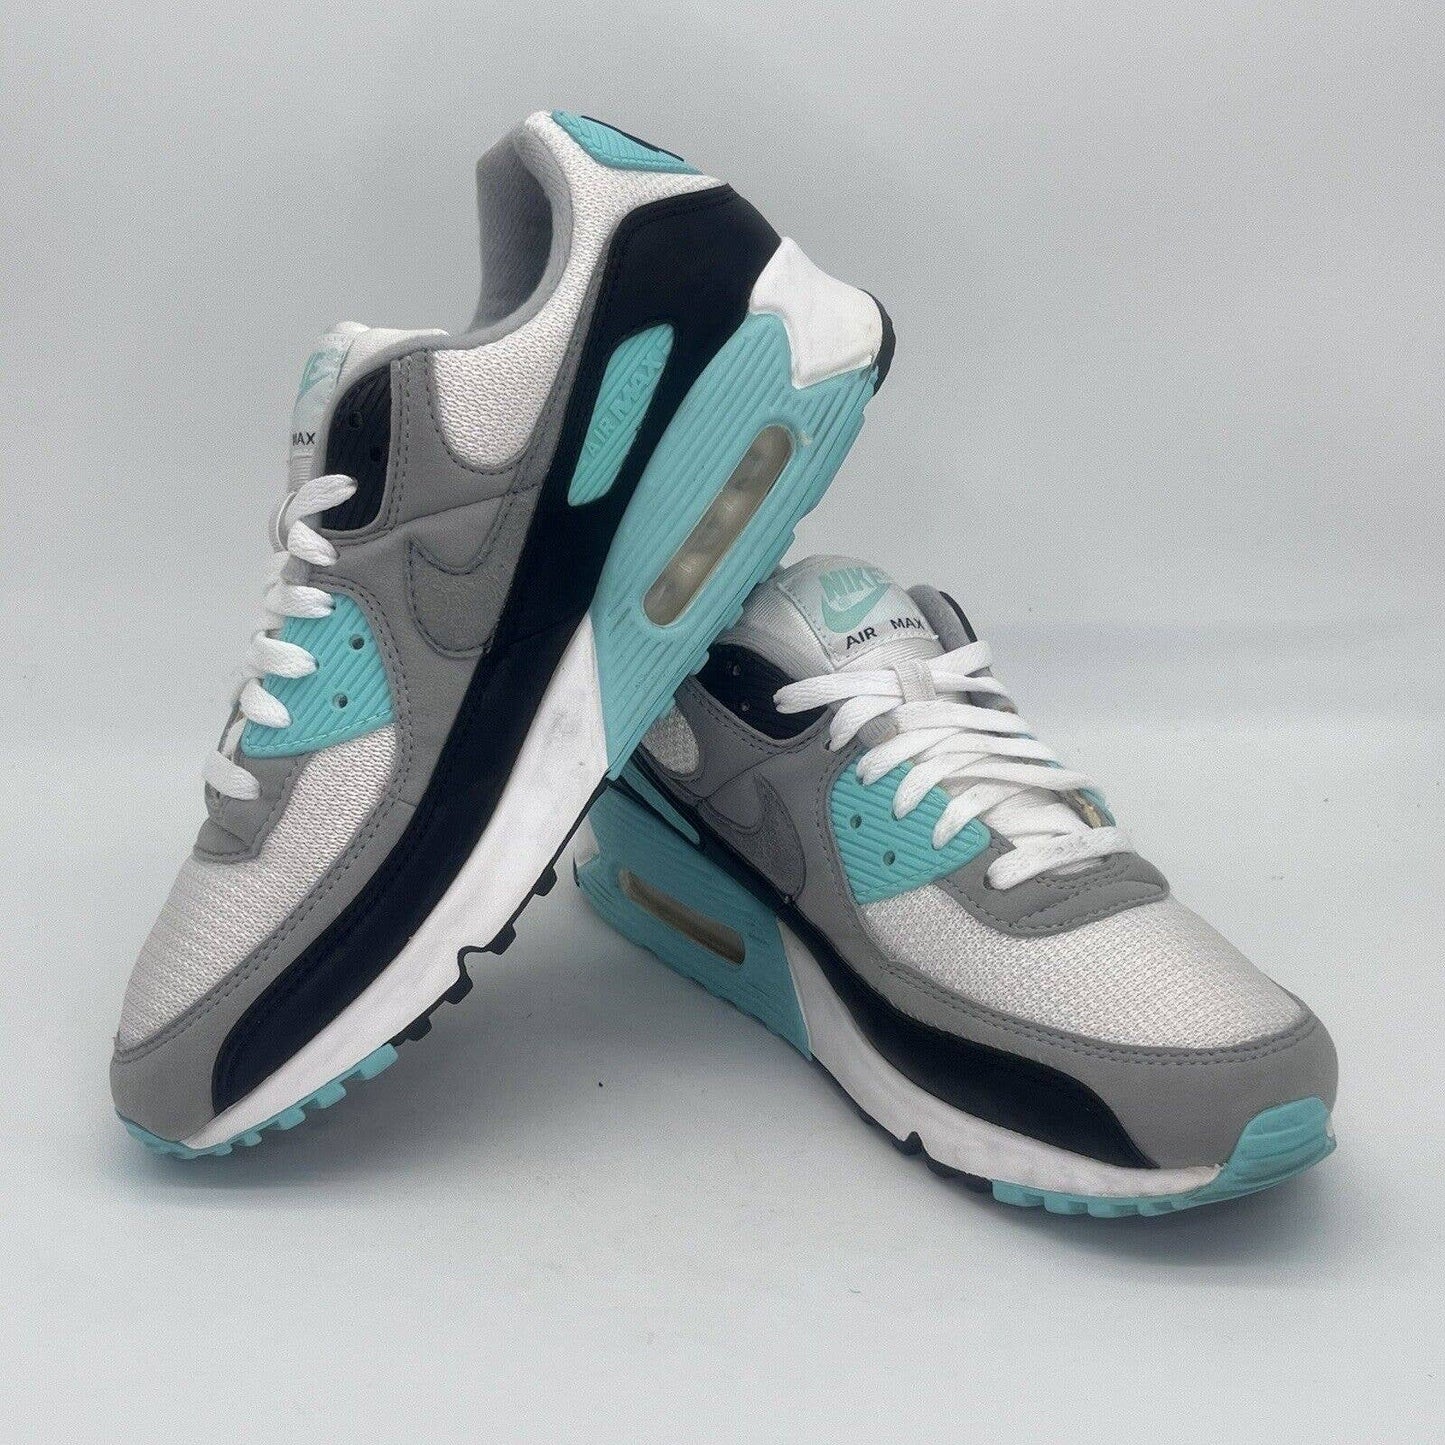 Nike Air Max 90 Hyper Turquoise Mens Size 10 CD0881-100 White Grey Sneakers 2020